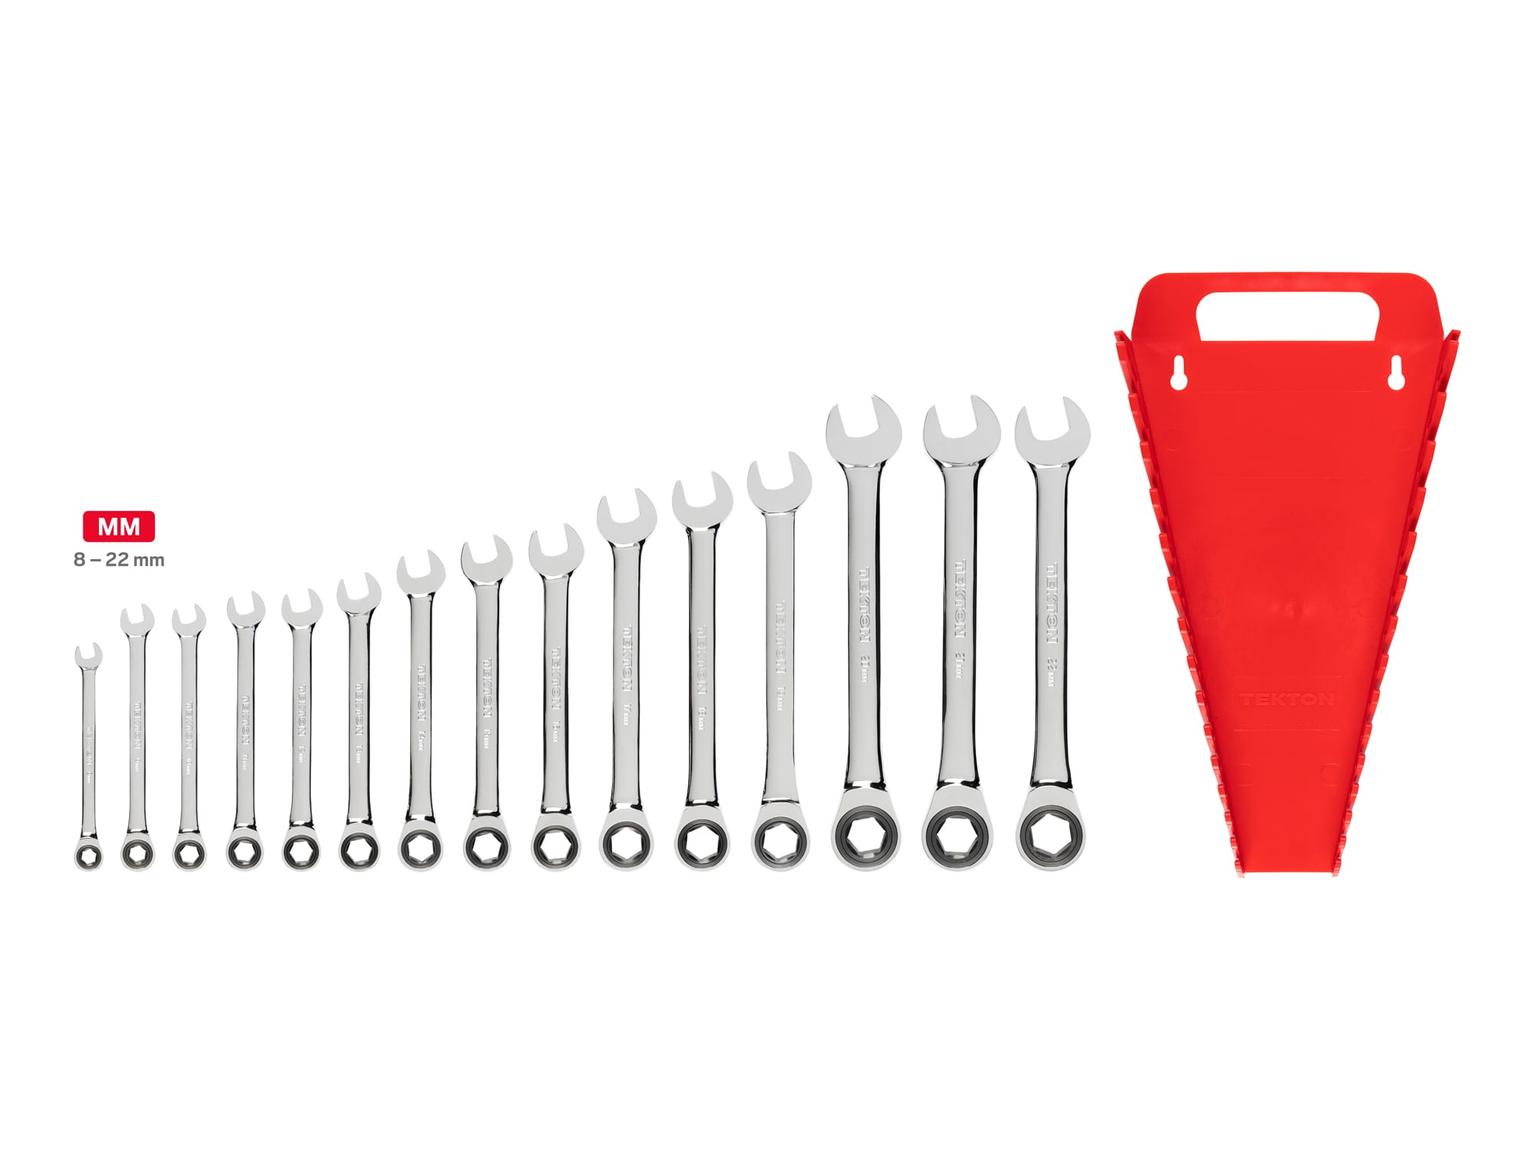 TEKTON WRN53171-T Ratcheting Combination Wrench Set with Holder, 15-Piece (8-22 mm)